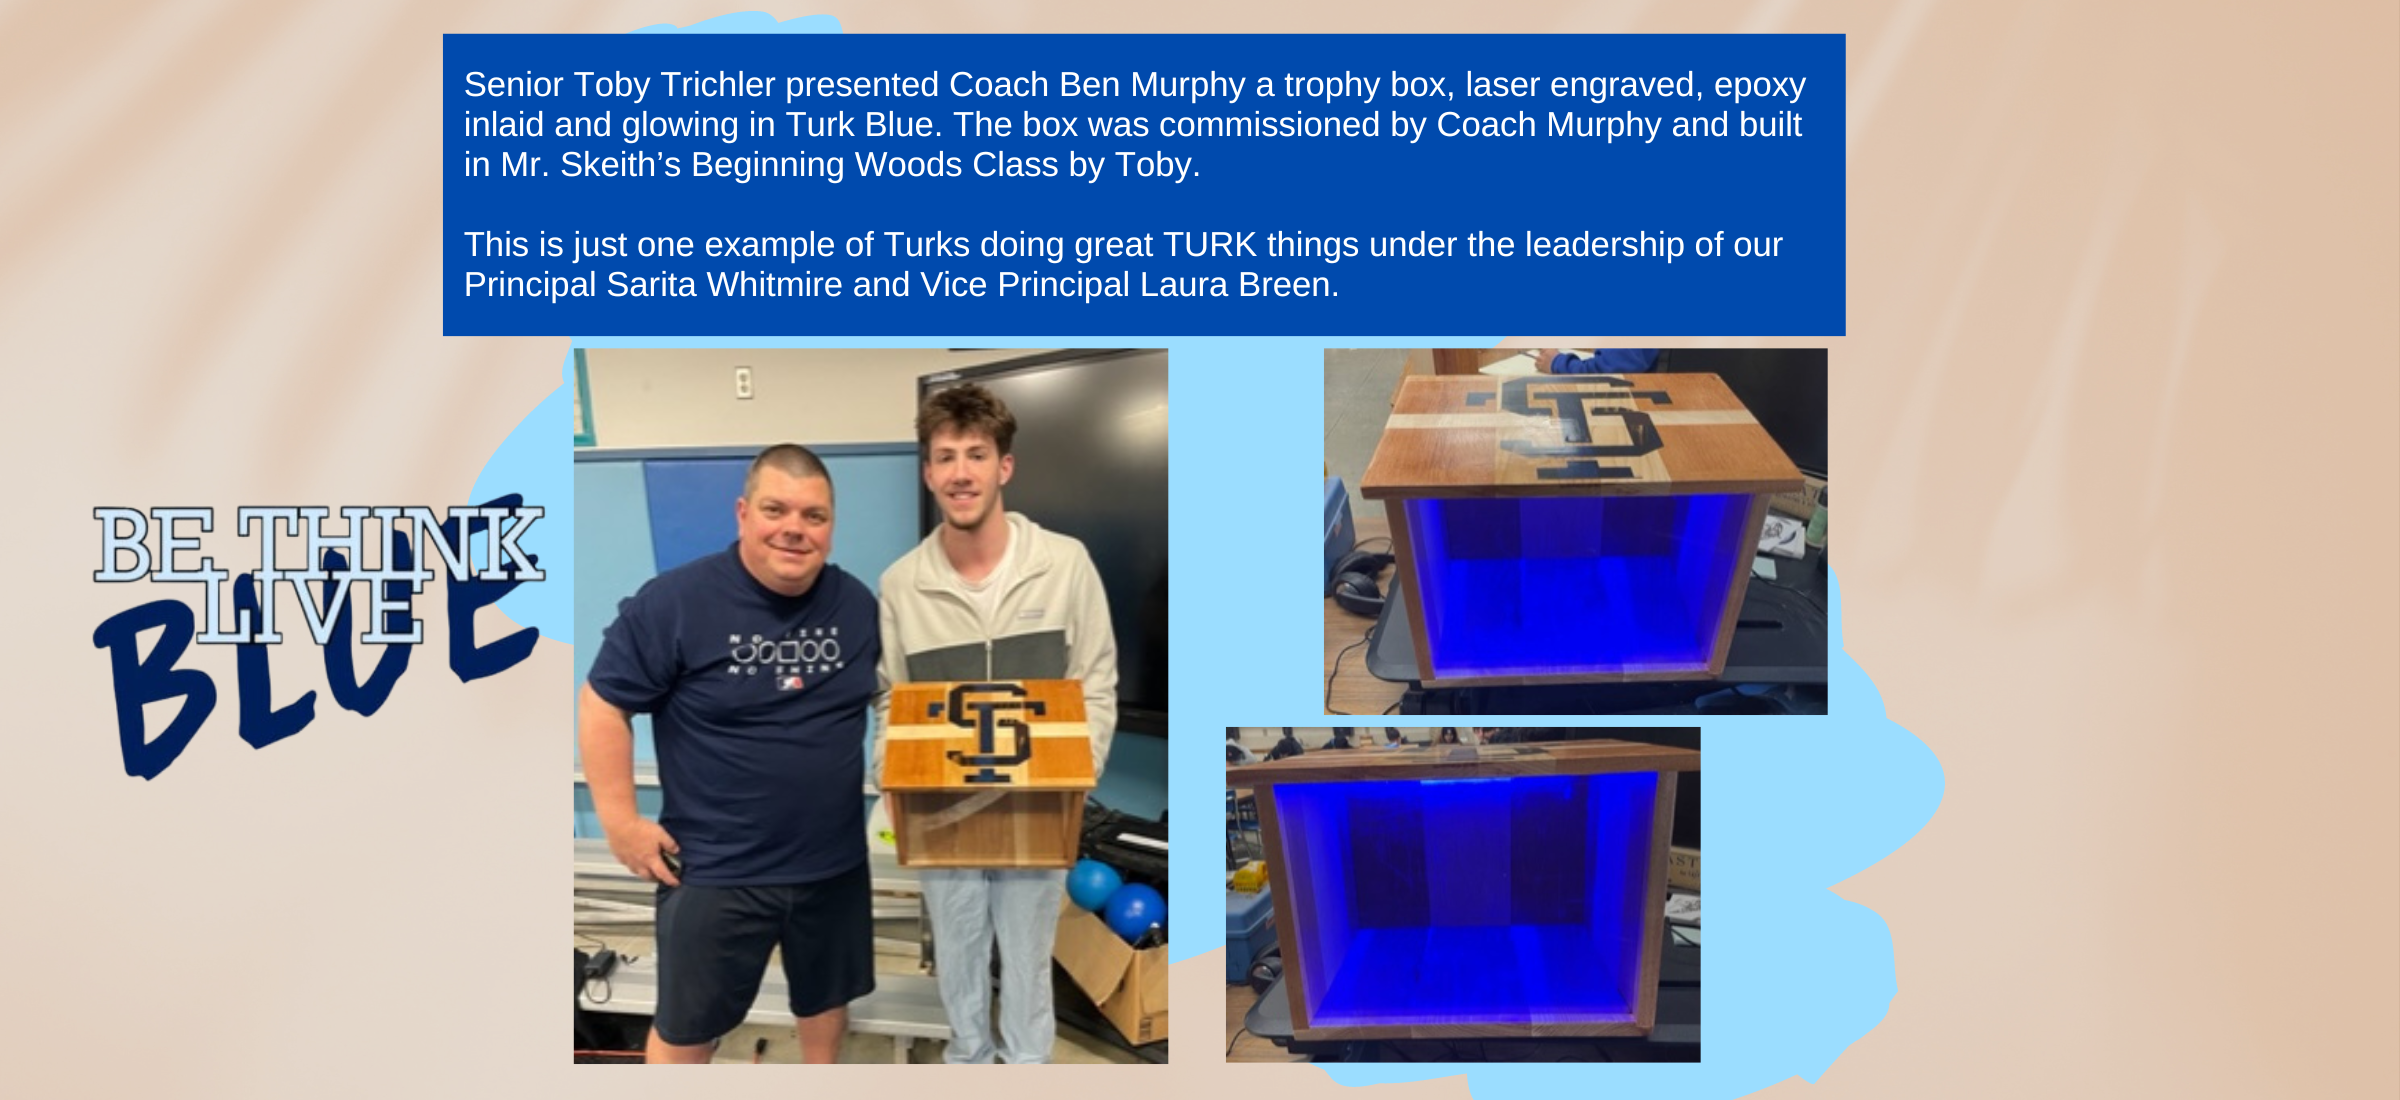 Senior Toby Trichler and Coach Ben Murphy and trophy box